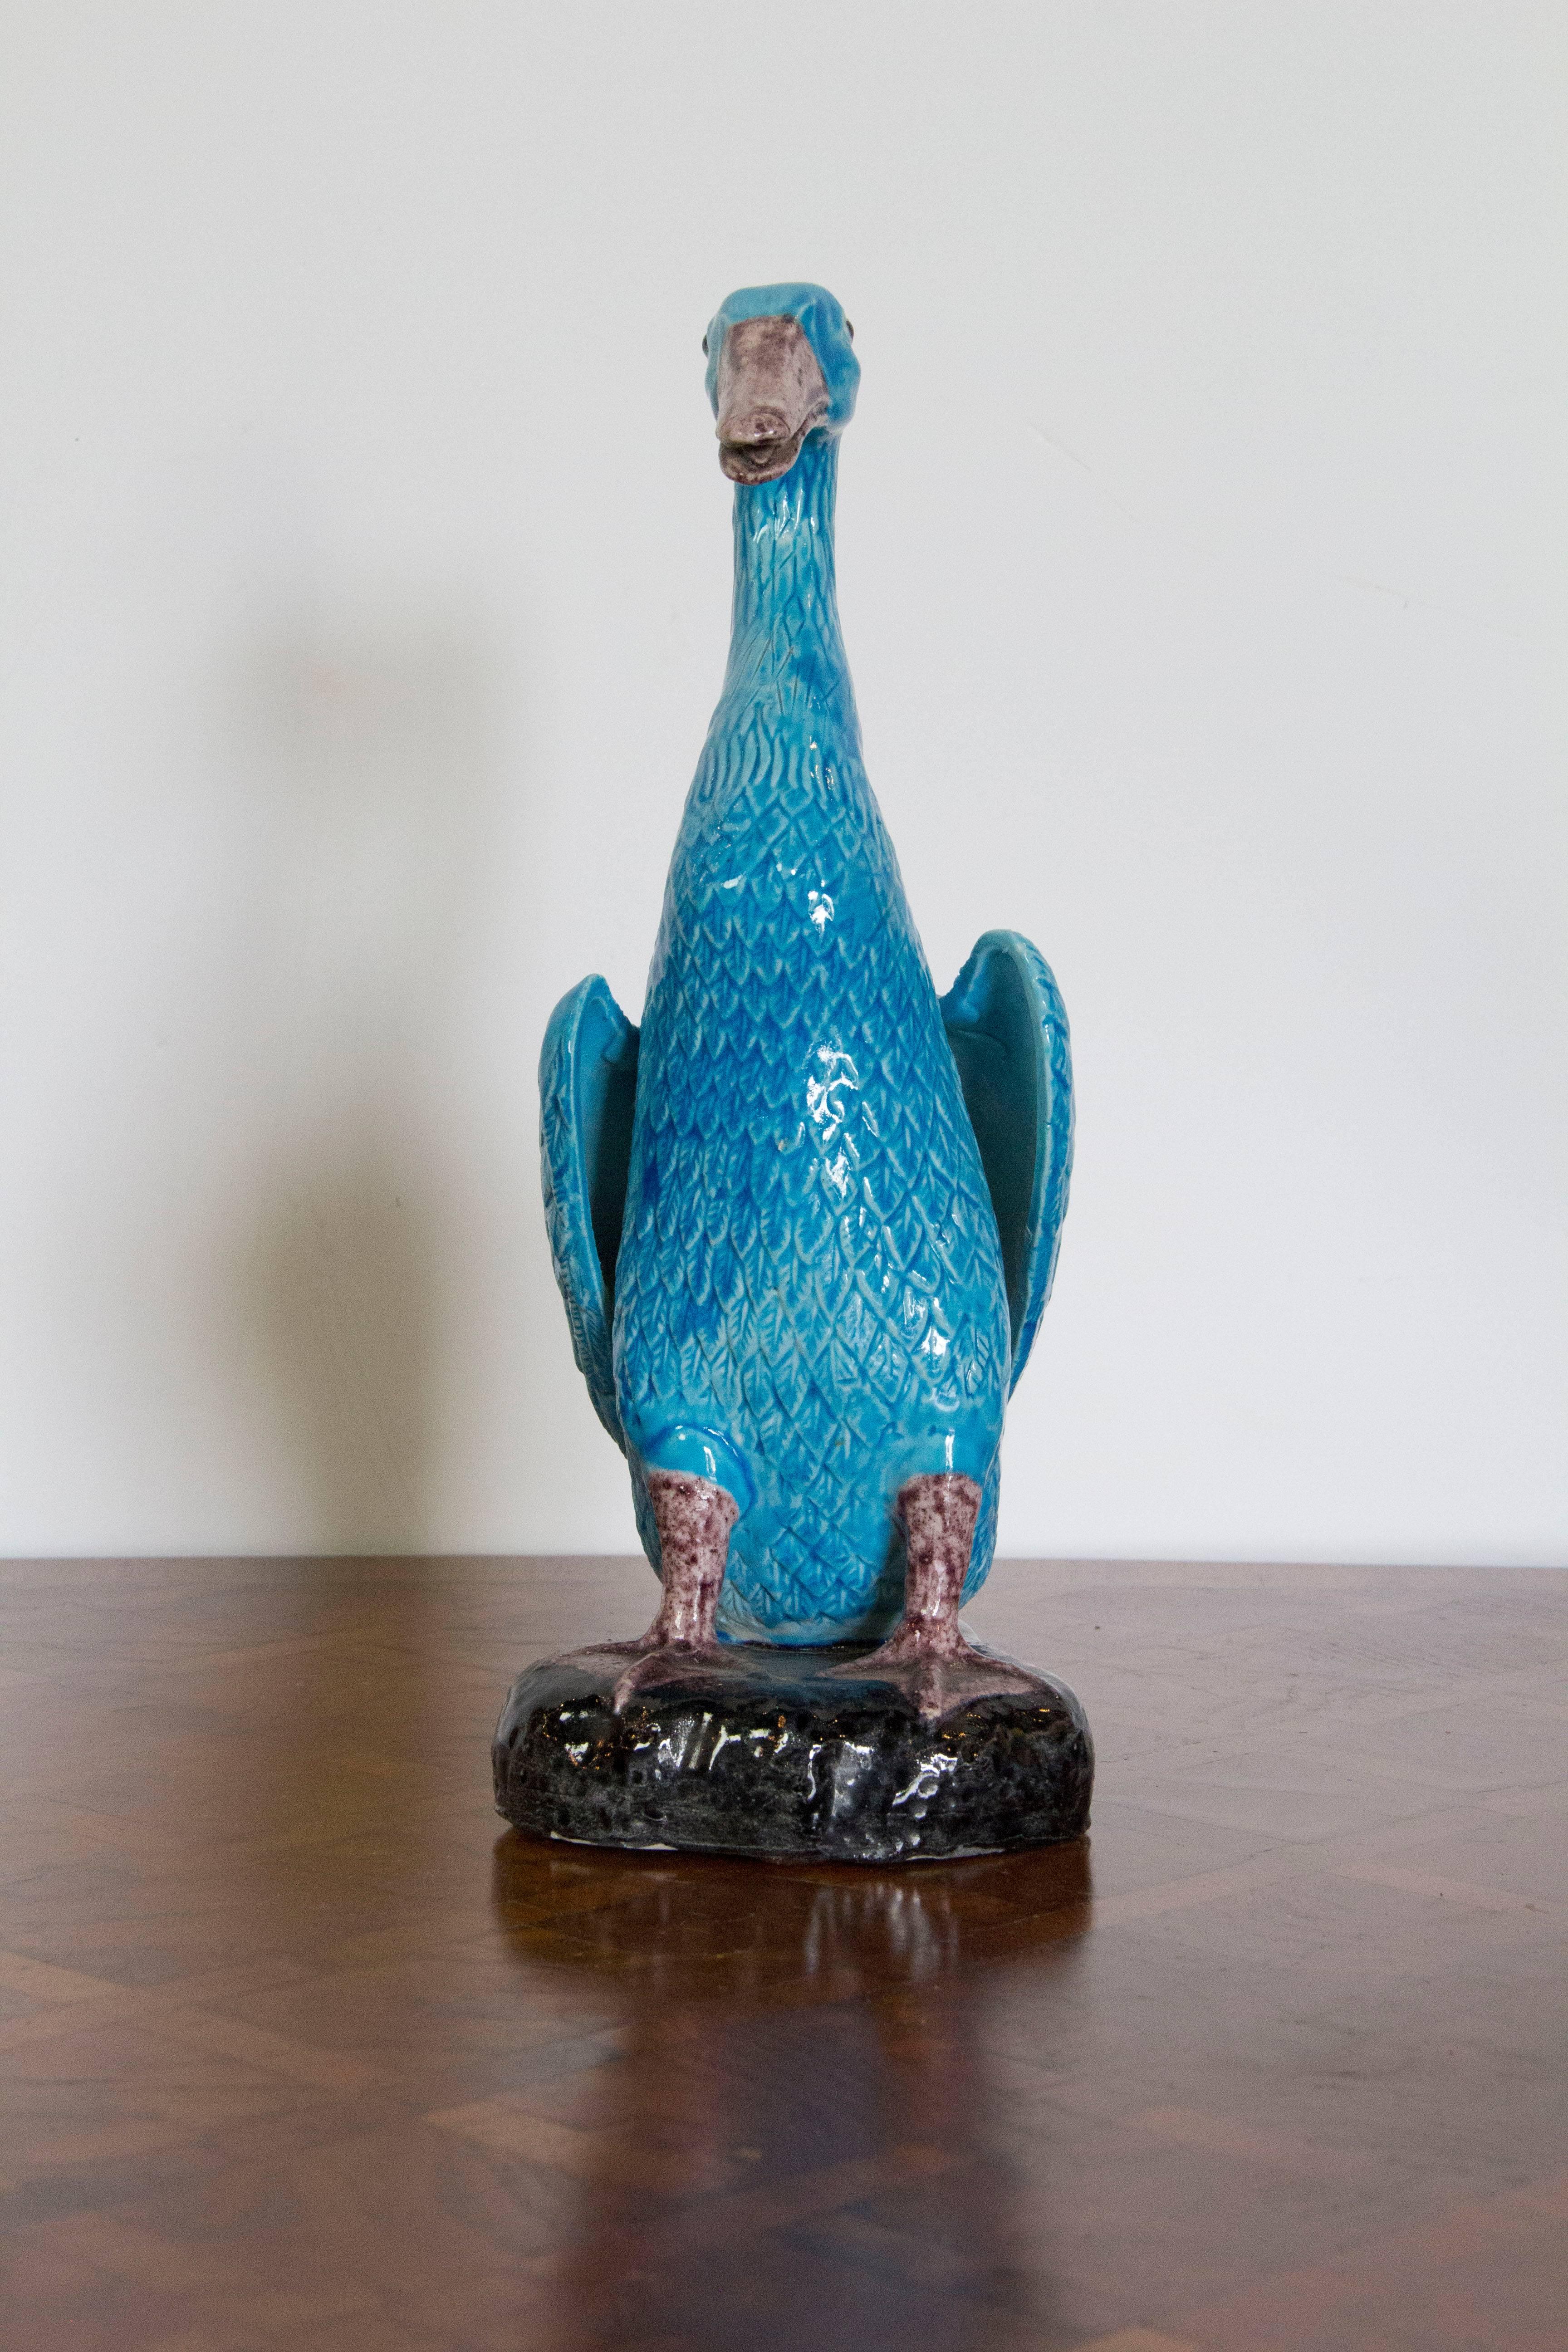 Charming brilliant turquoise blue Chinese porcelain duck figure.